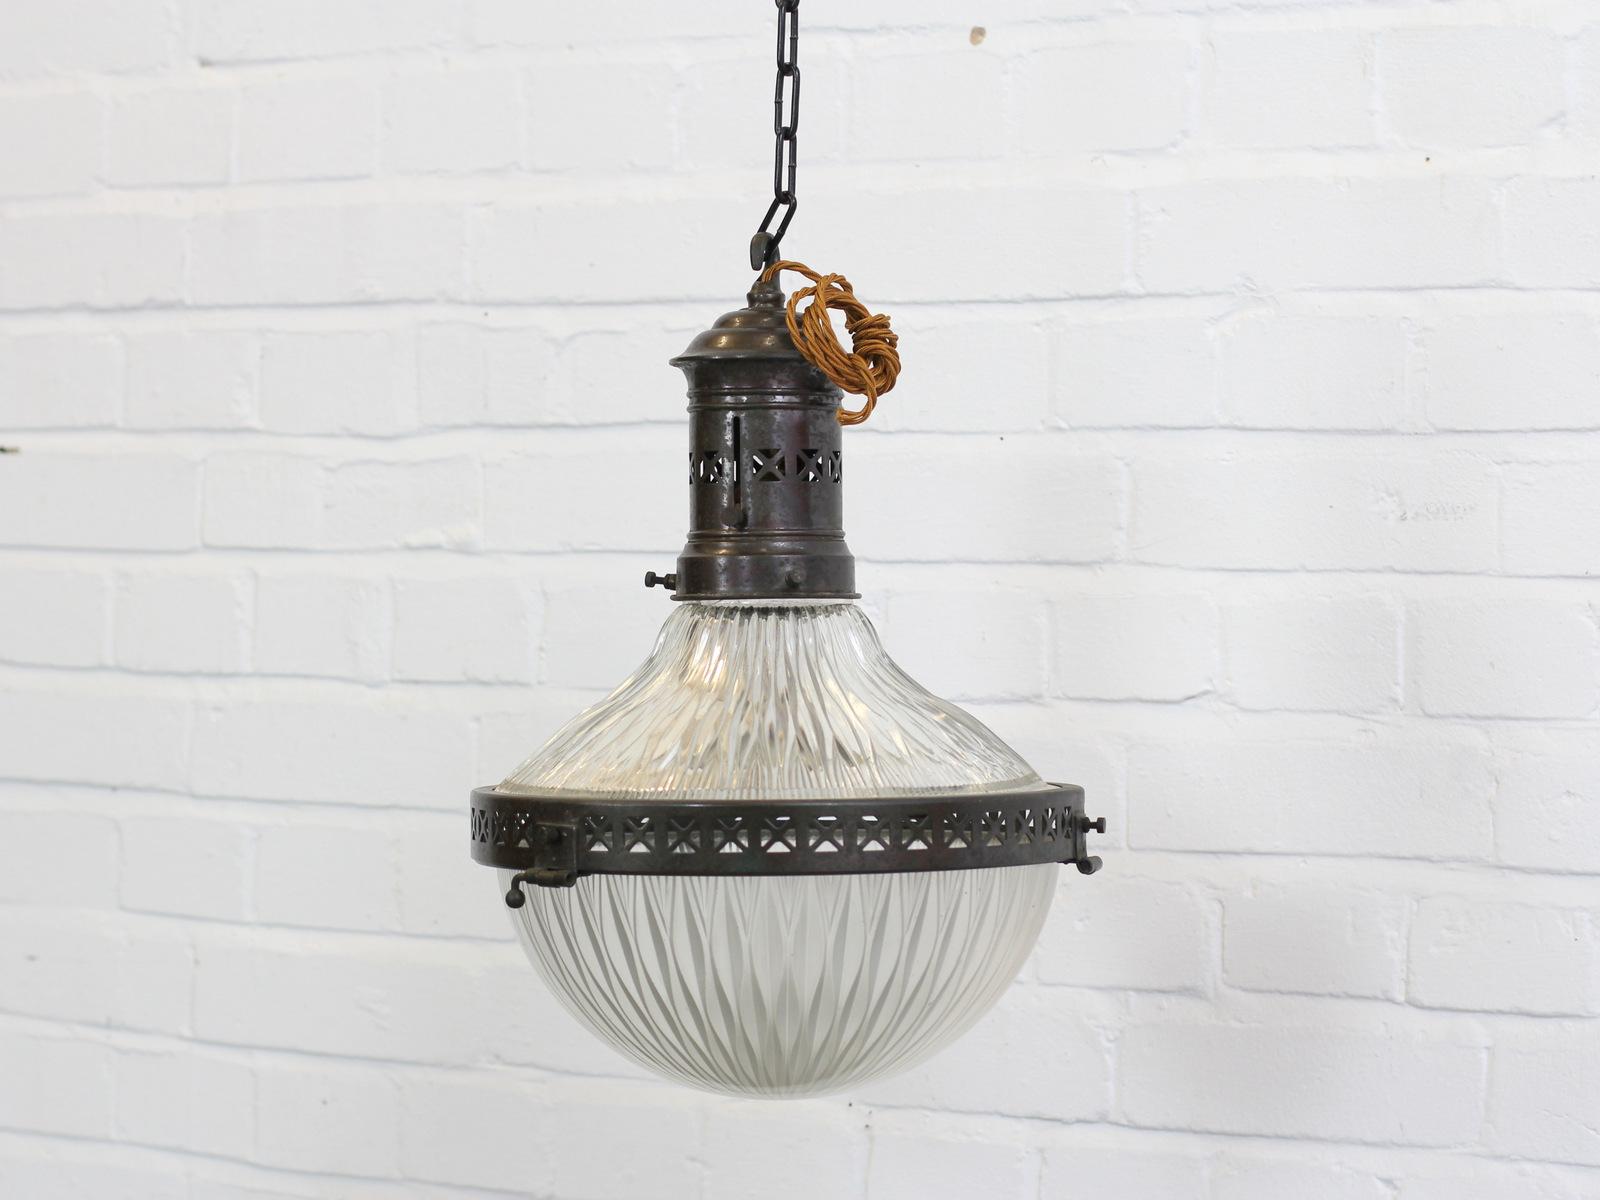 Large holophane pendant light, circa 1910

- Detailed copper gallery and rim
- Comes with 100cm of gold braided cable
- Comes with ceiling rose and black chain
- Takes E27 fitting bulbs
- Prismatic glass
- French, circa 1910
- 34cm wide x